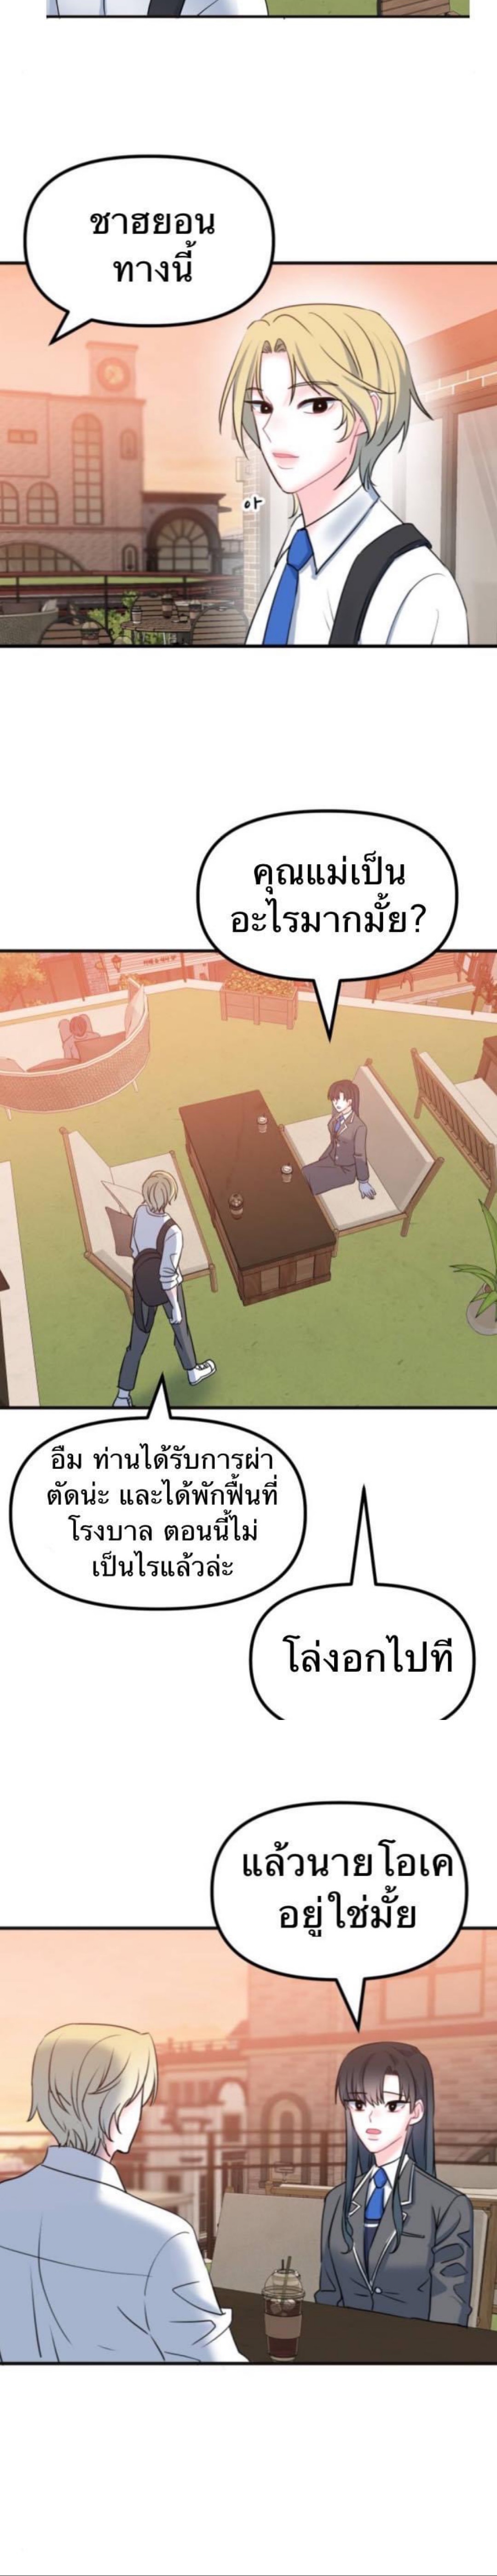 Mary’s Burning Circuit of Happiness ตอนที่ 6